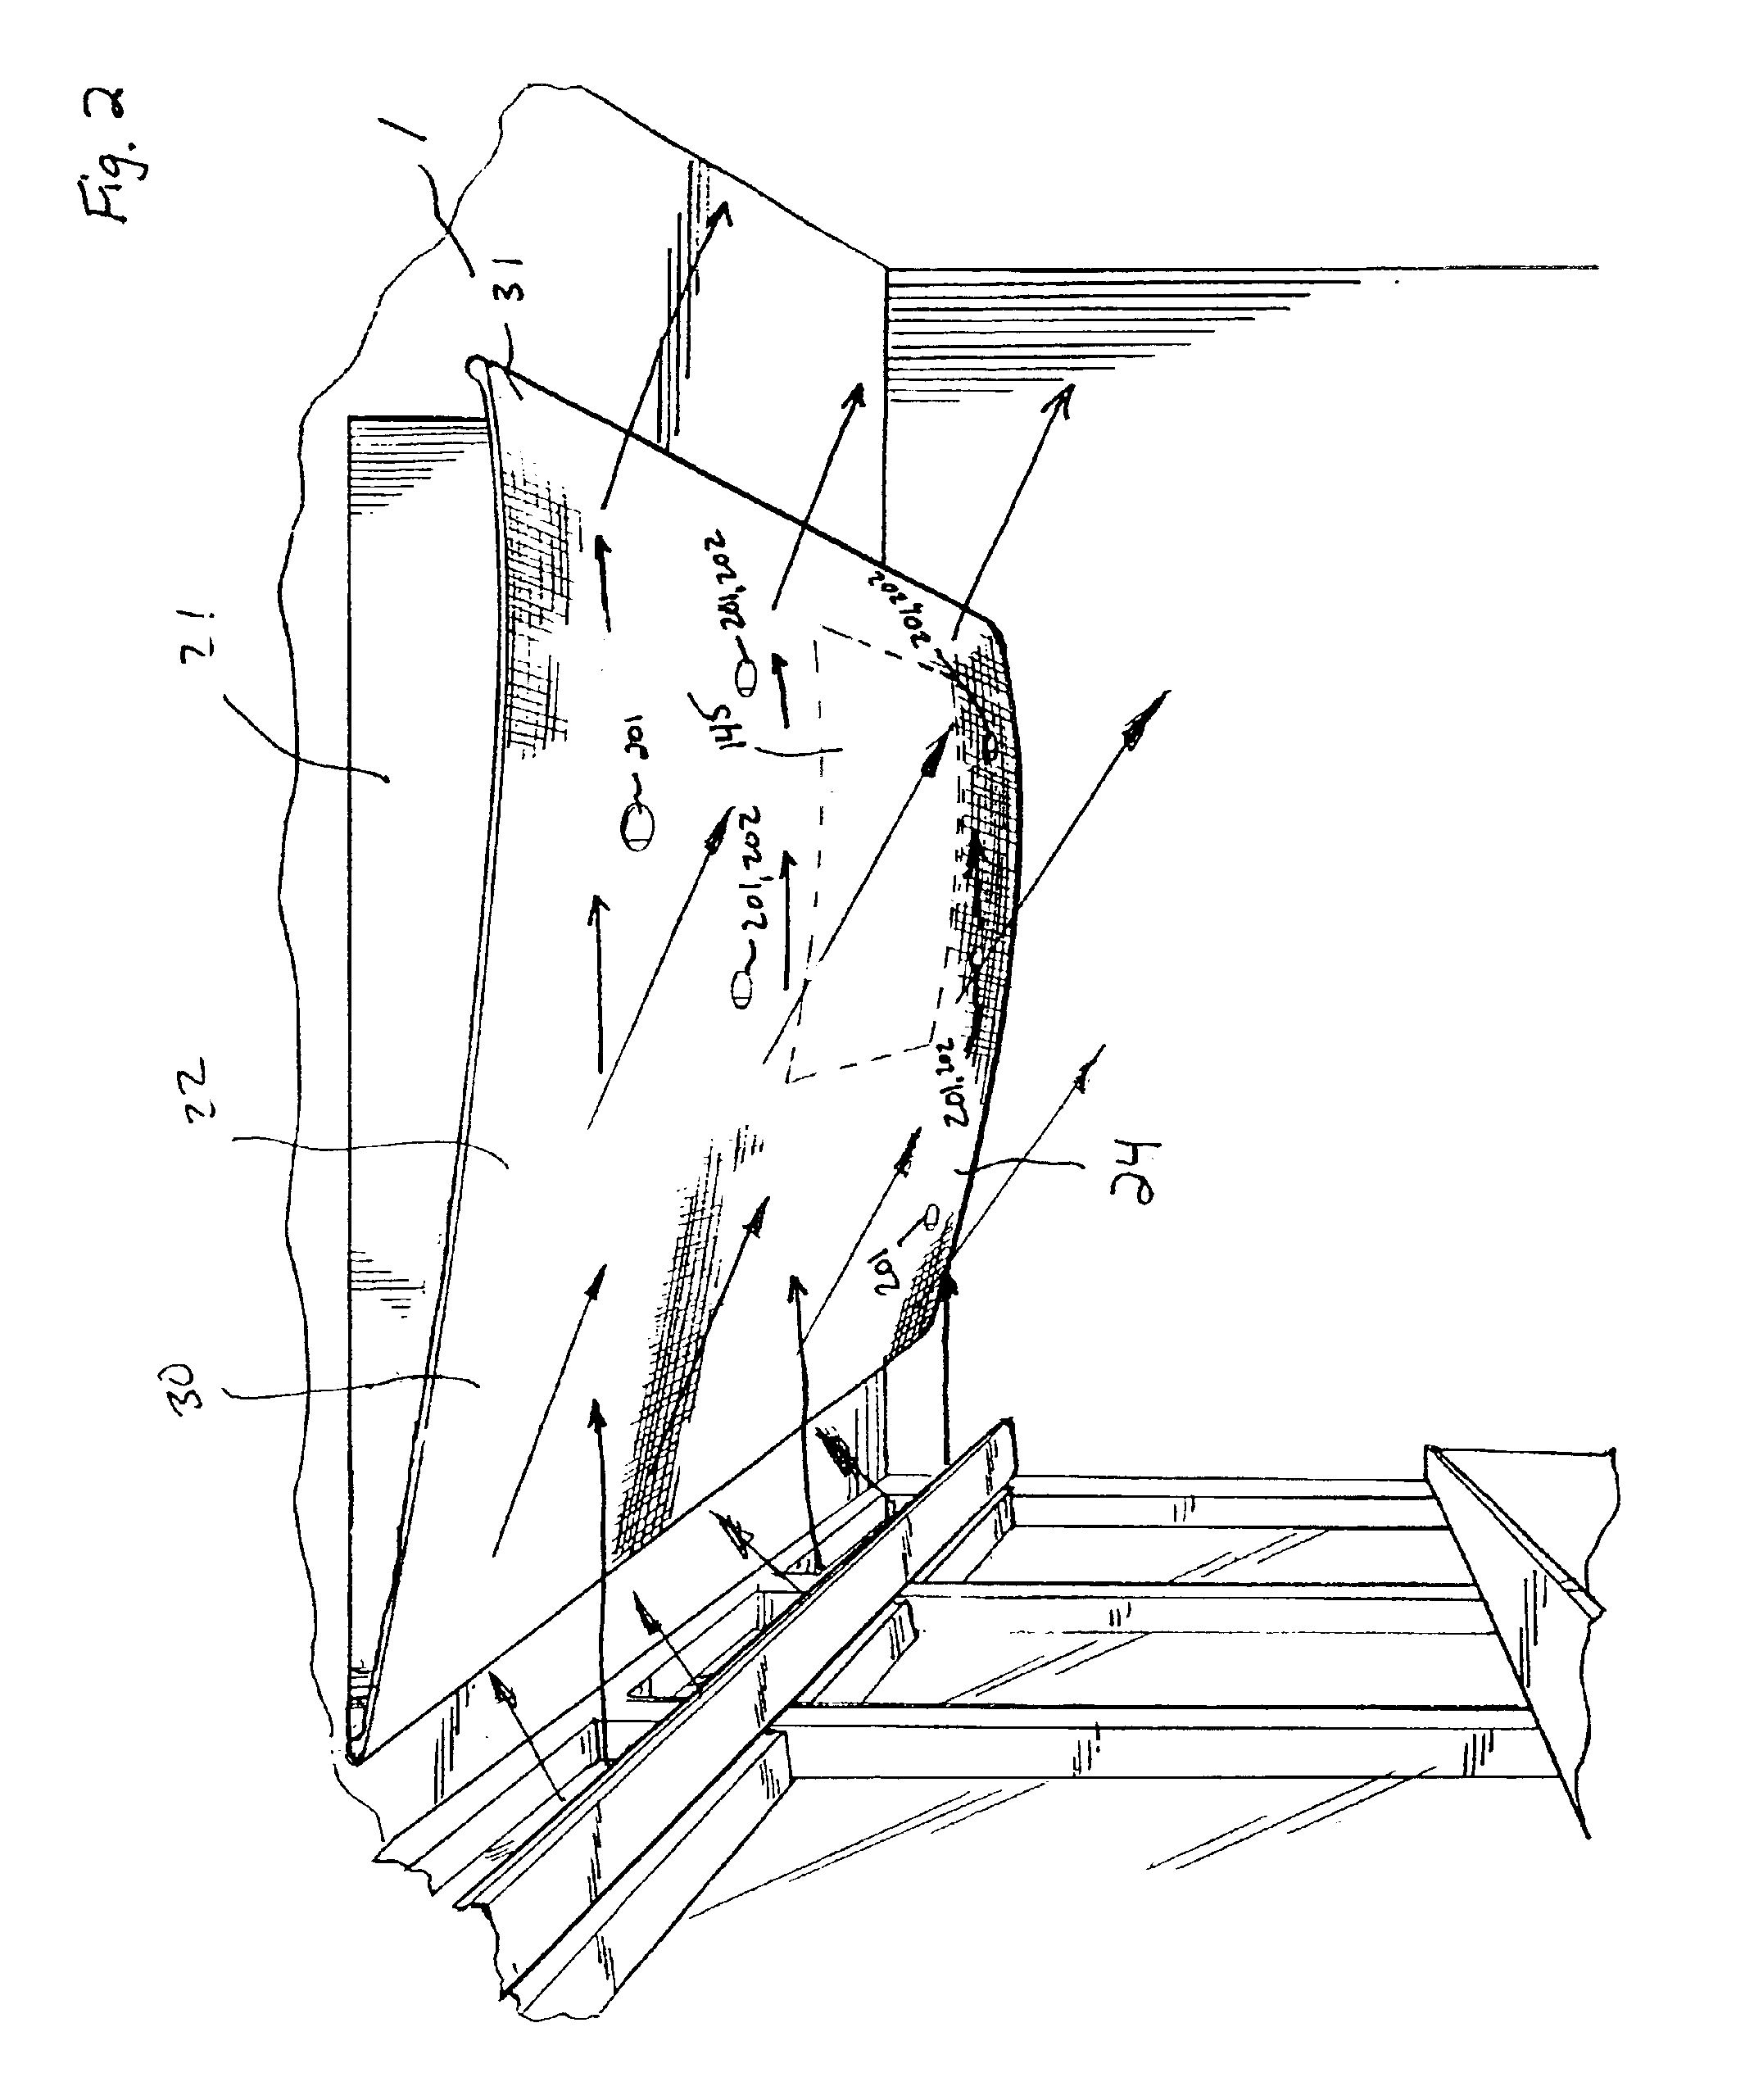 Method and overhead system for performing a plurality of therapeutic functions within a room